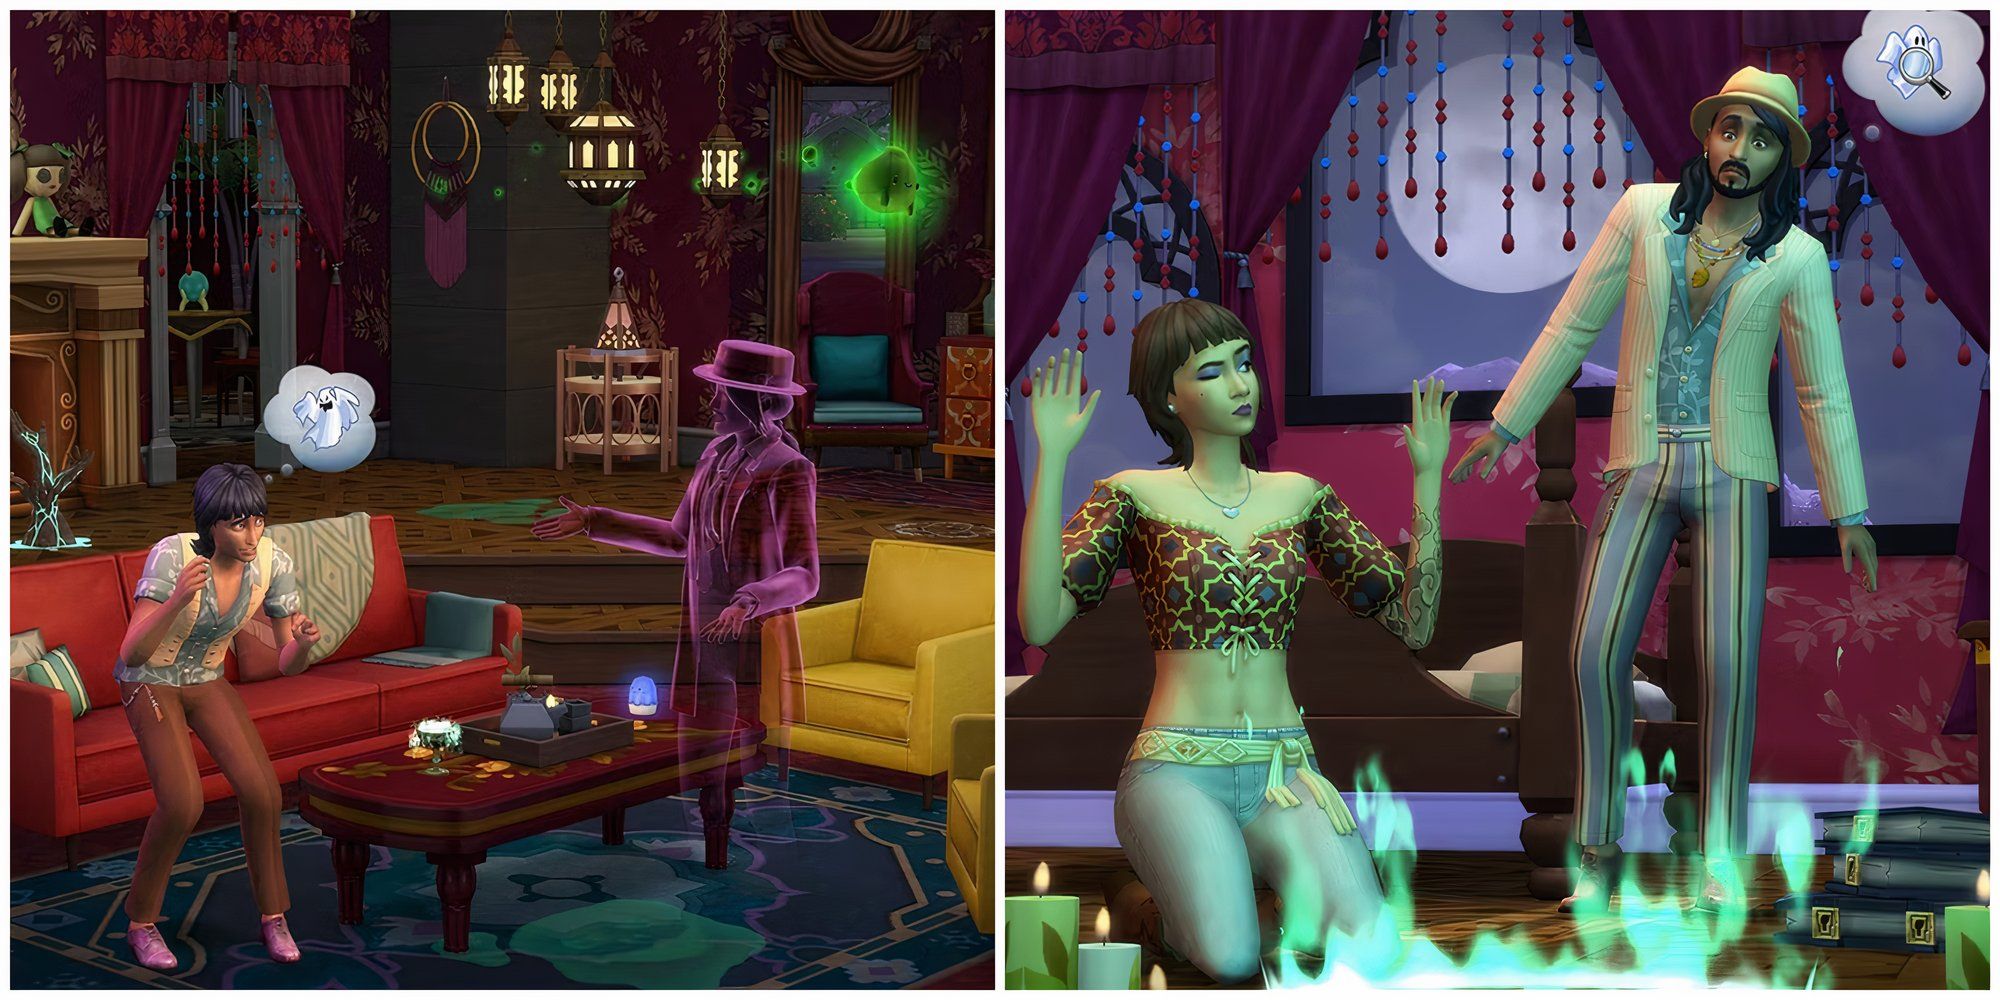 The Haunted Mansion storyline sticks to the mystery and supernatural genres, allowing players to captivate viewers' attention